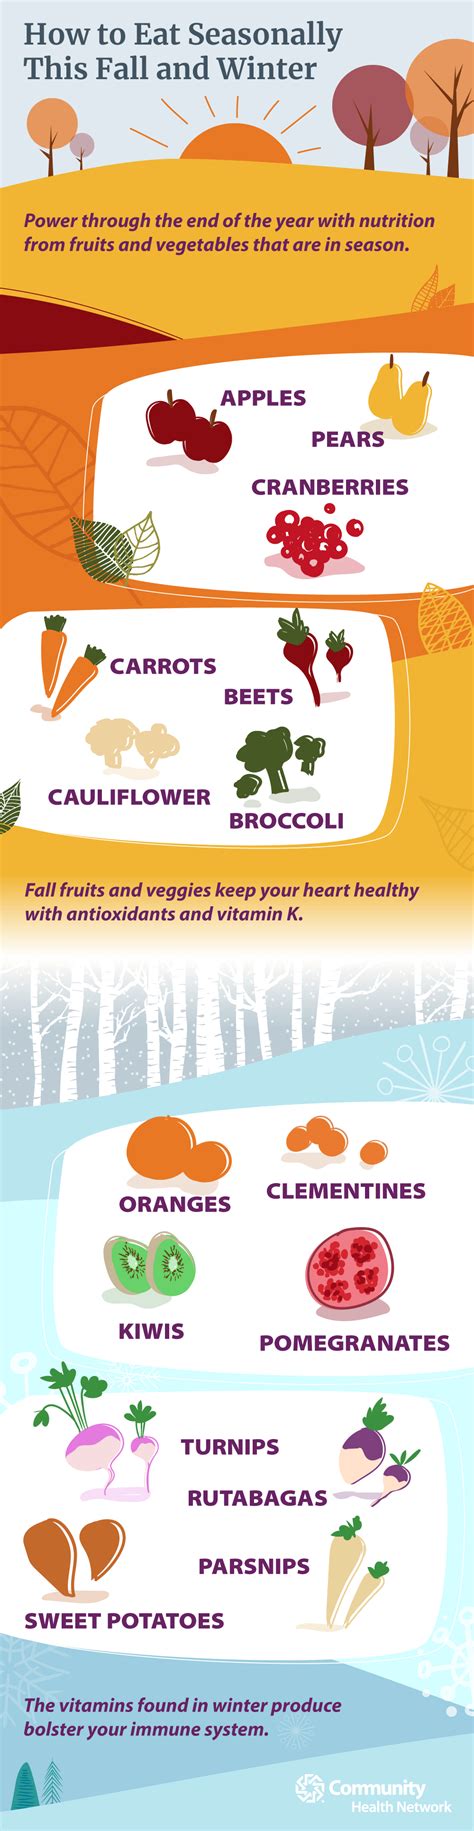 How To Eat Seasonally This Fall And Winter Community Health Network